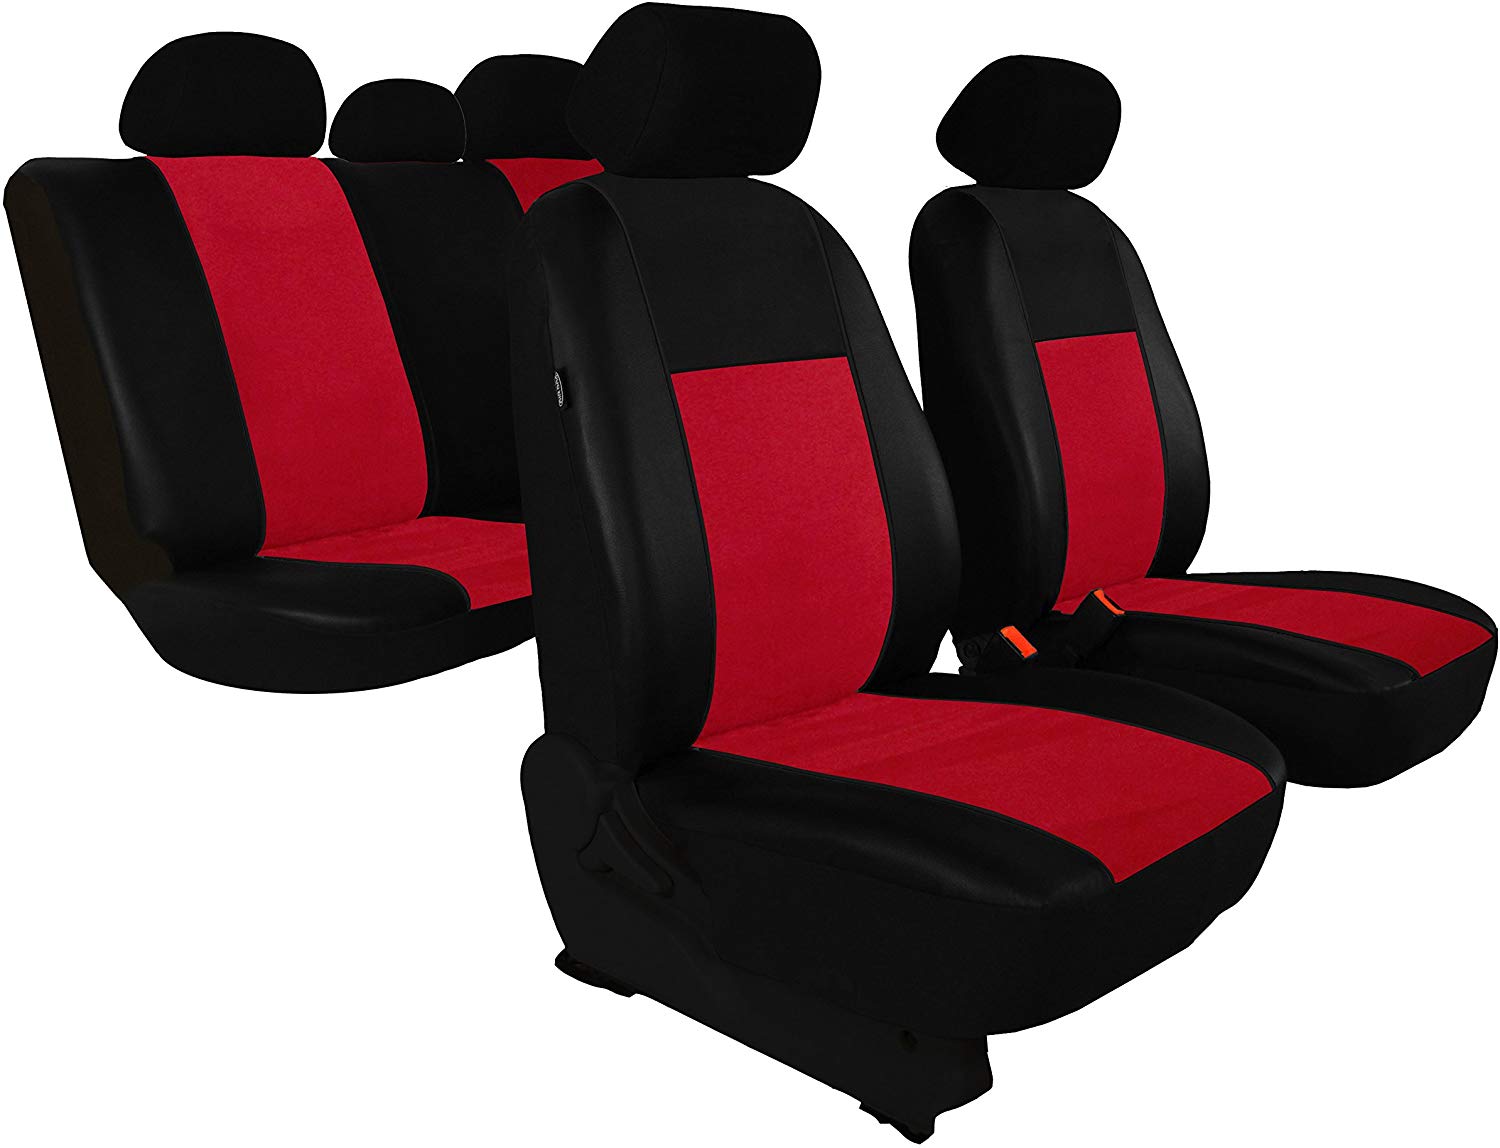 \'CUSTOMISED Car Seat Cover Set for Tiguan II 2016 from Unico. Colour: Red.